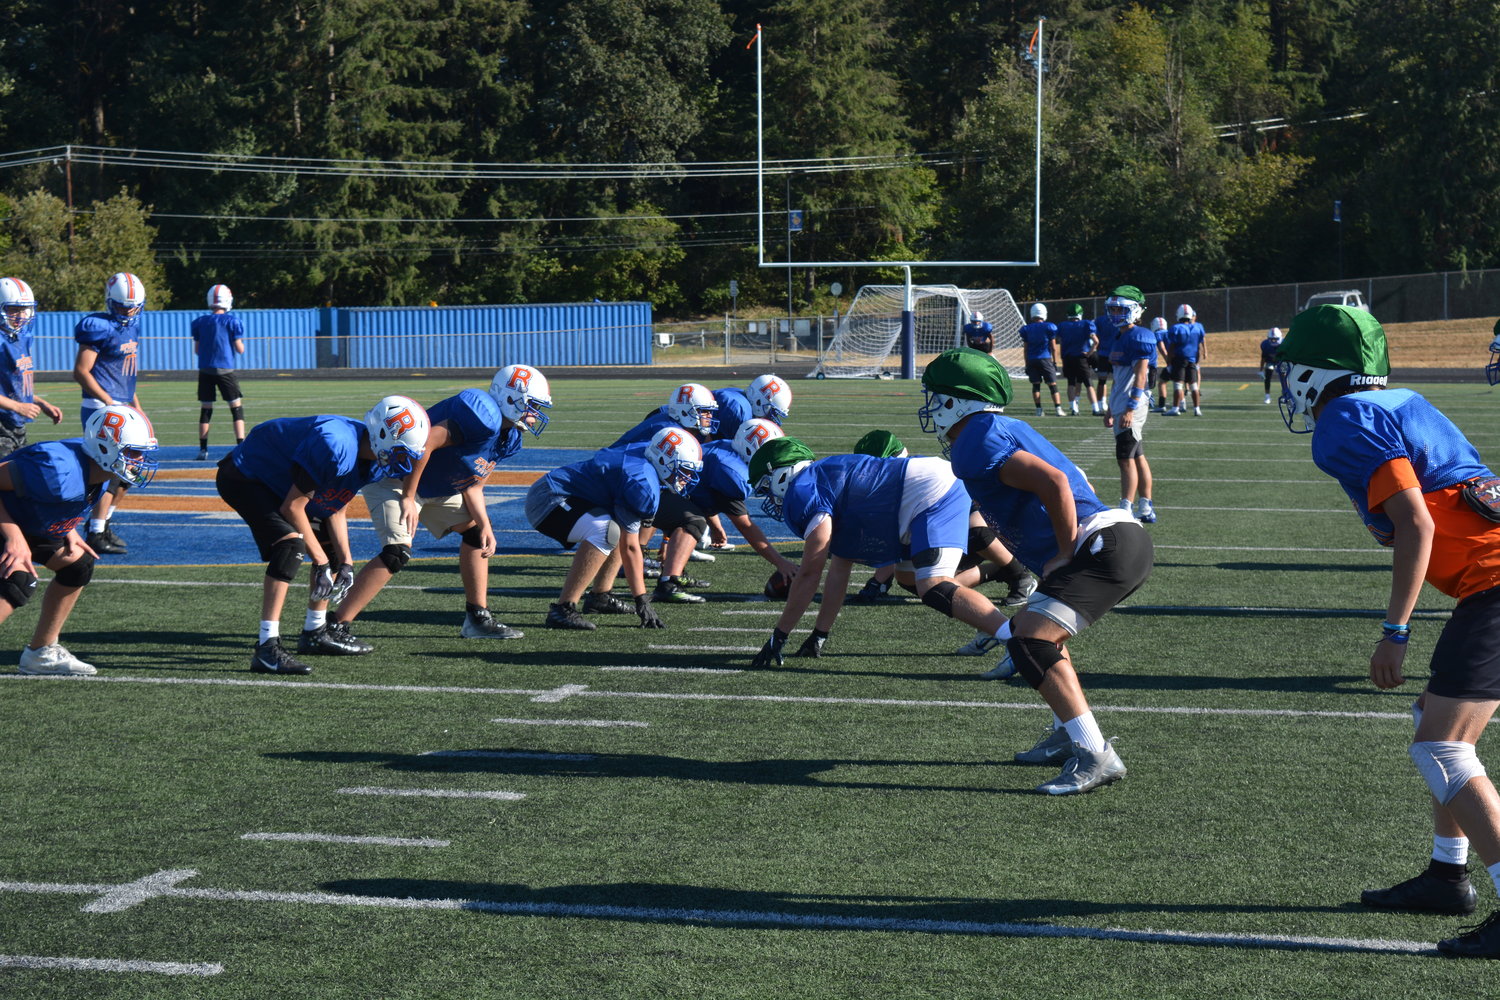 The Ridgefield Spudders get into position during practice at Ridgefield High School on Sept. 6.